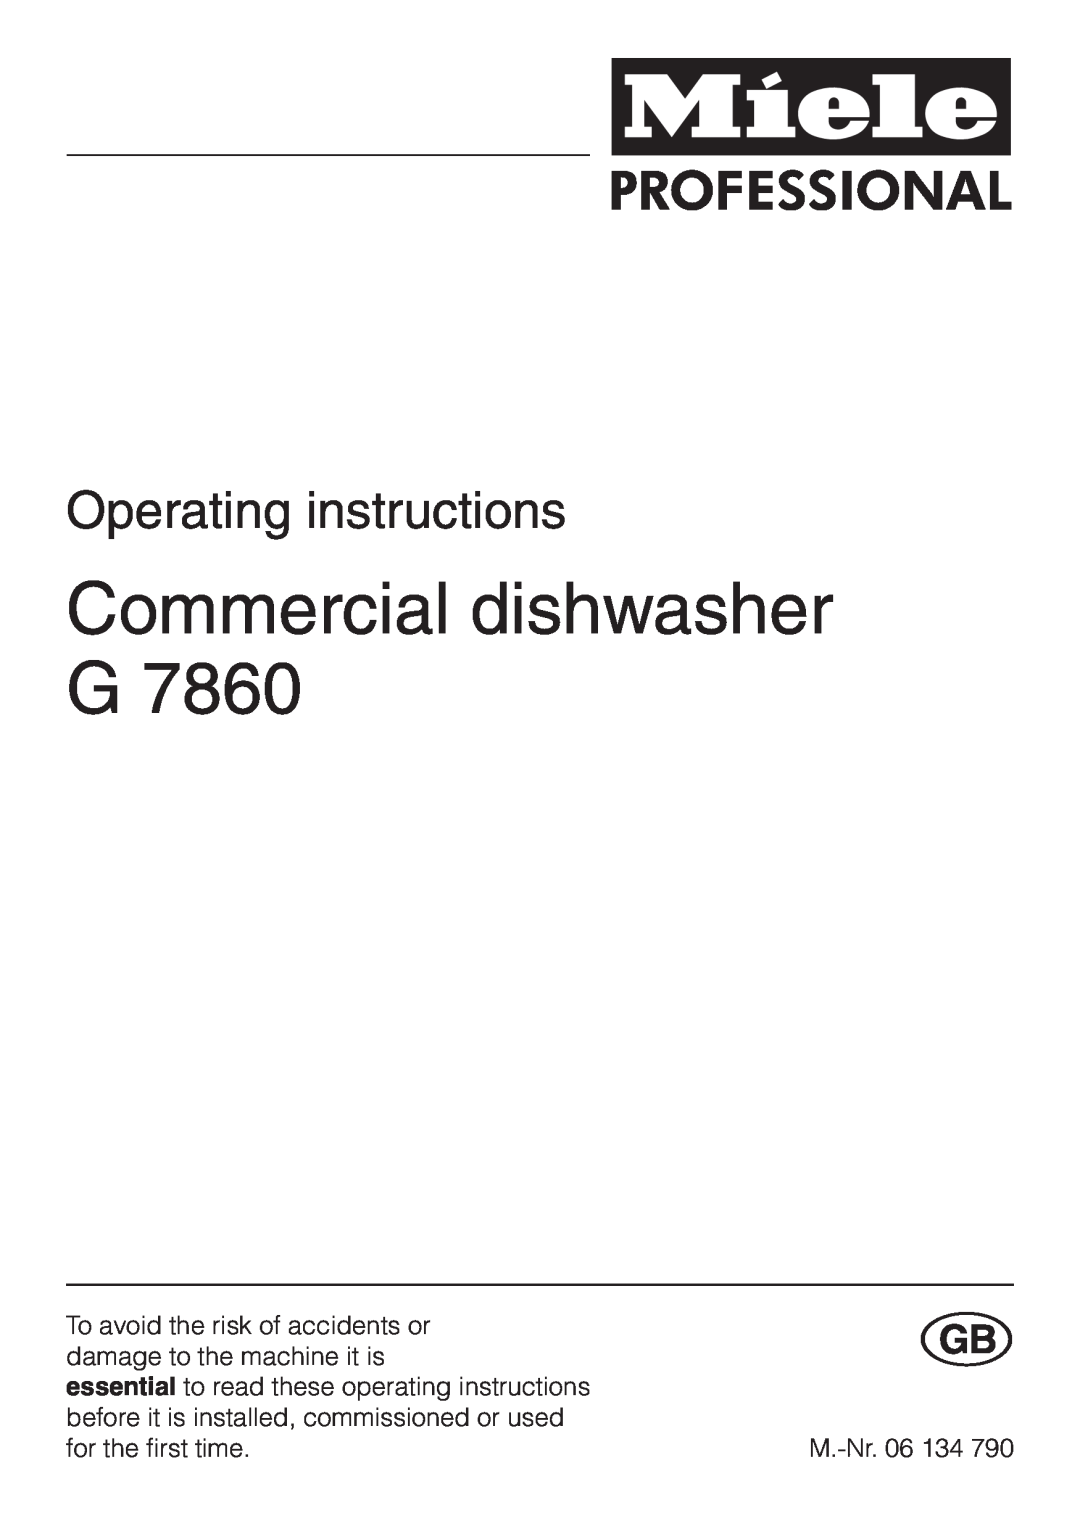 Miele G 7860 operating instructions Commercial dishwasher G, Operating instructions 